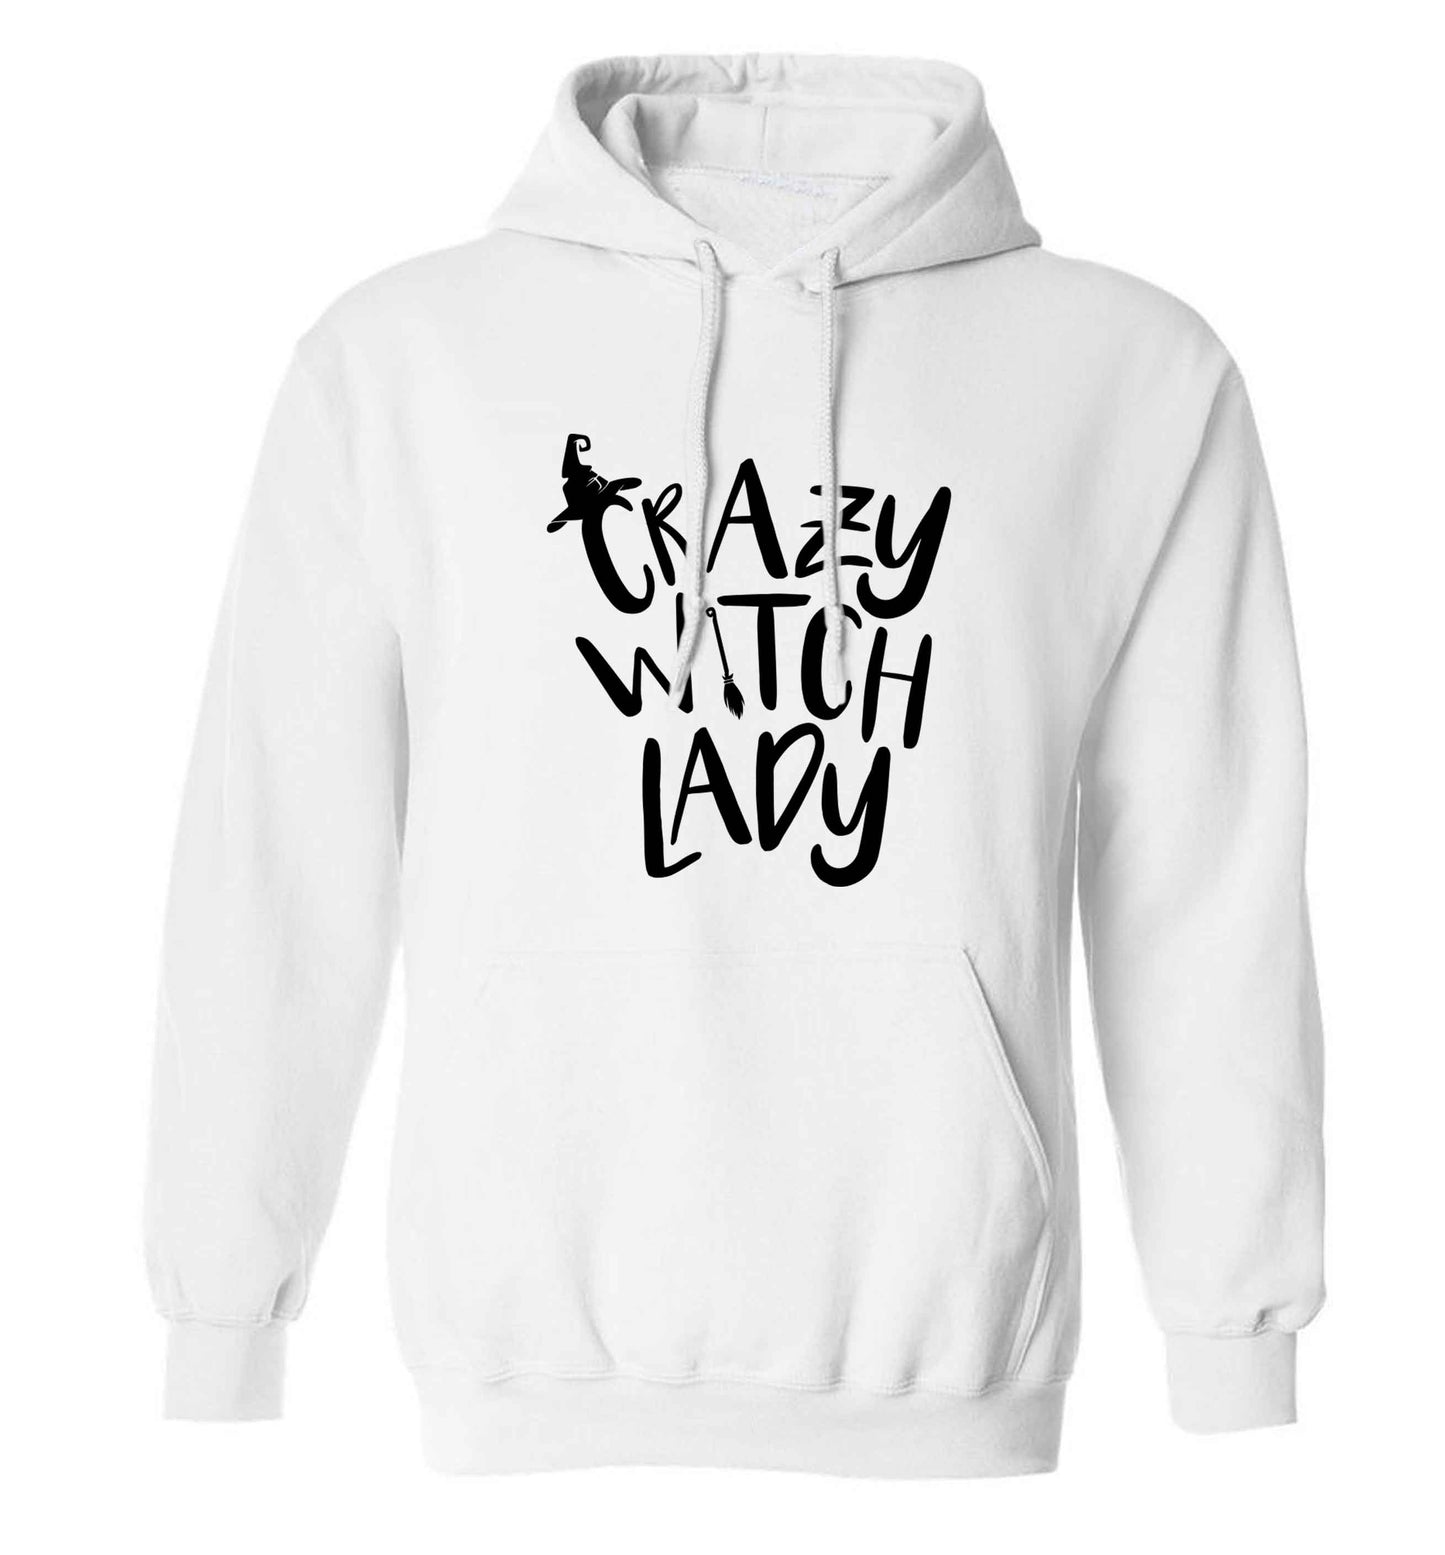 Crazy witch lady adults unisex white hoodie 2XL